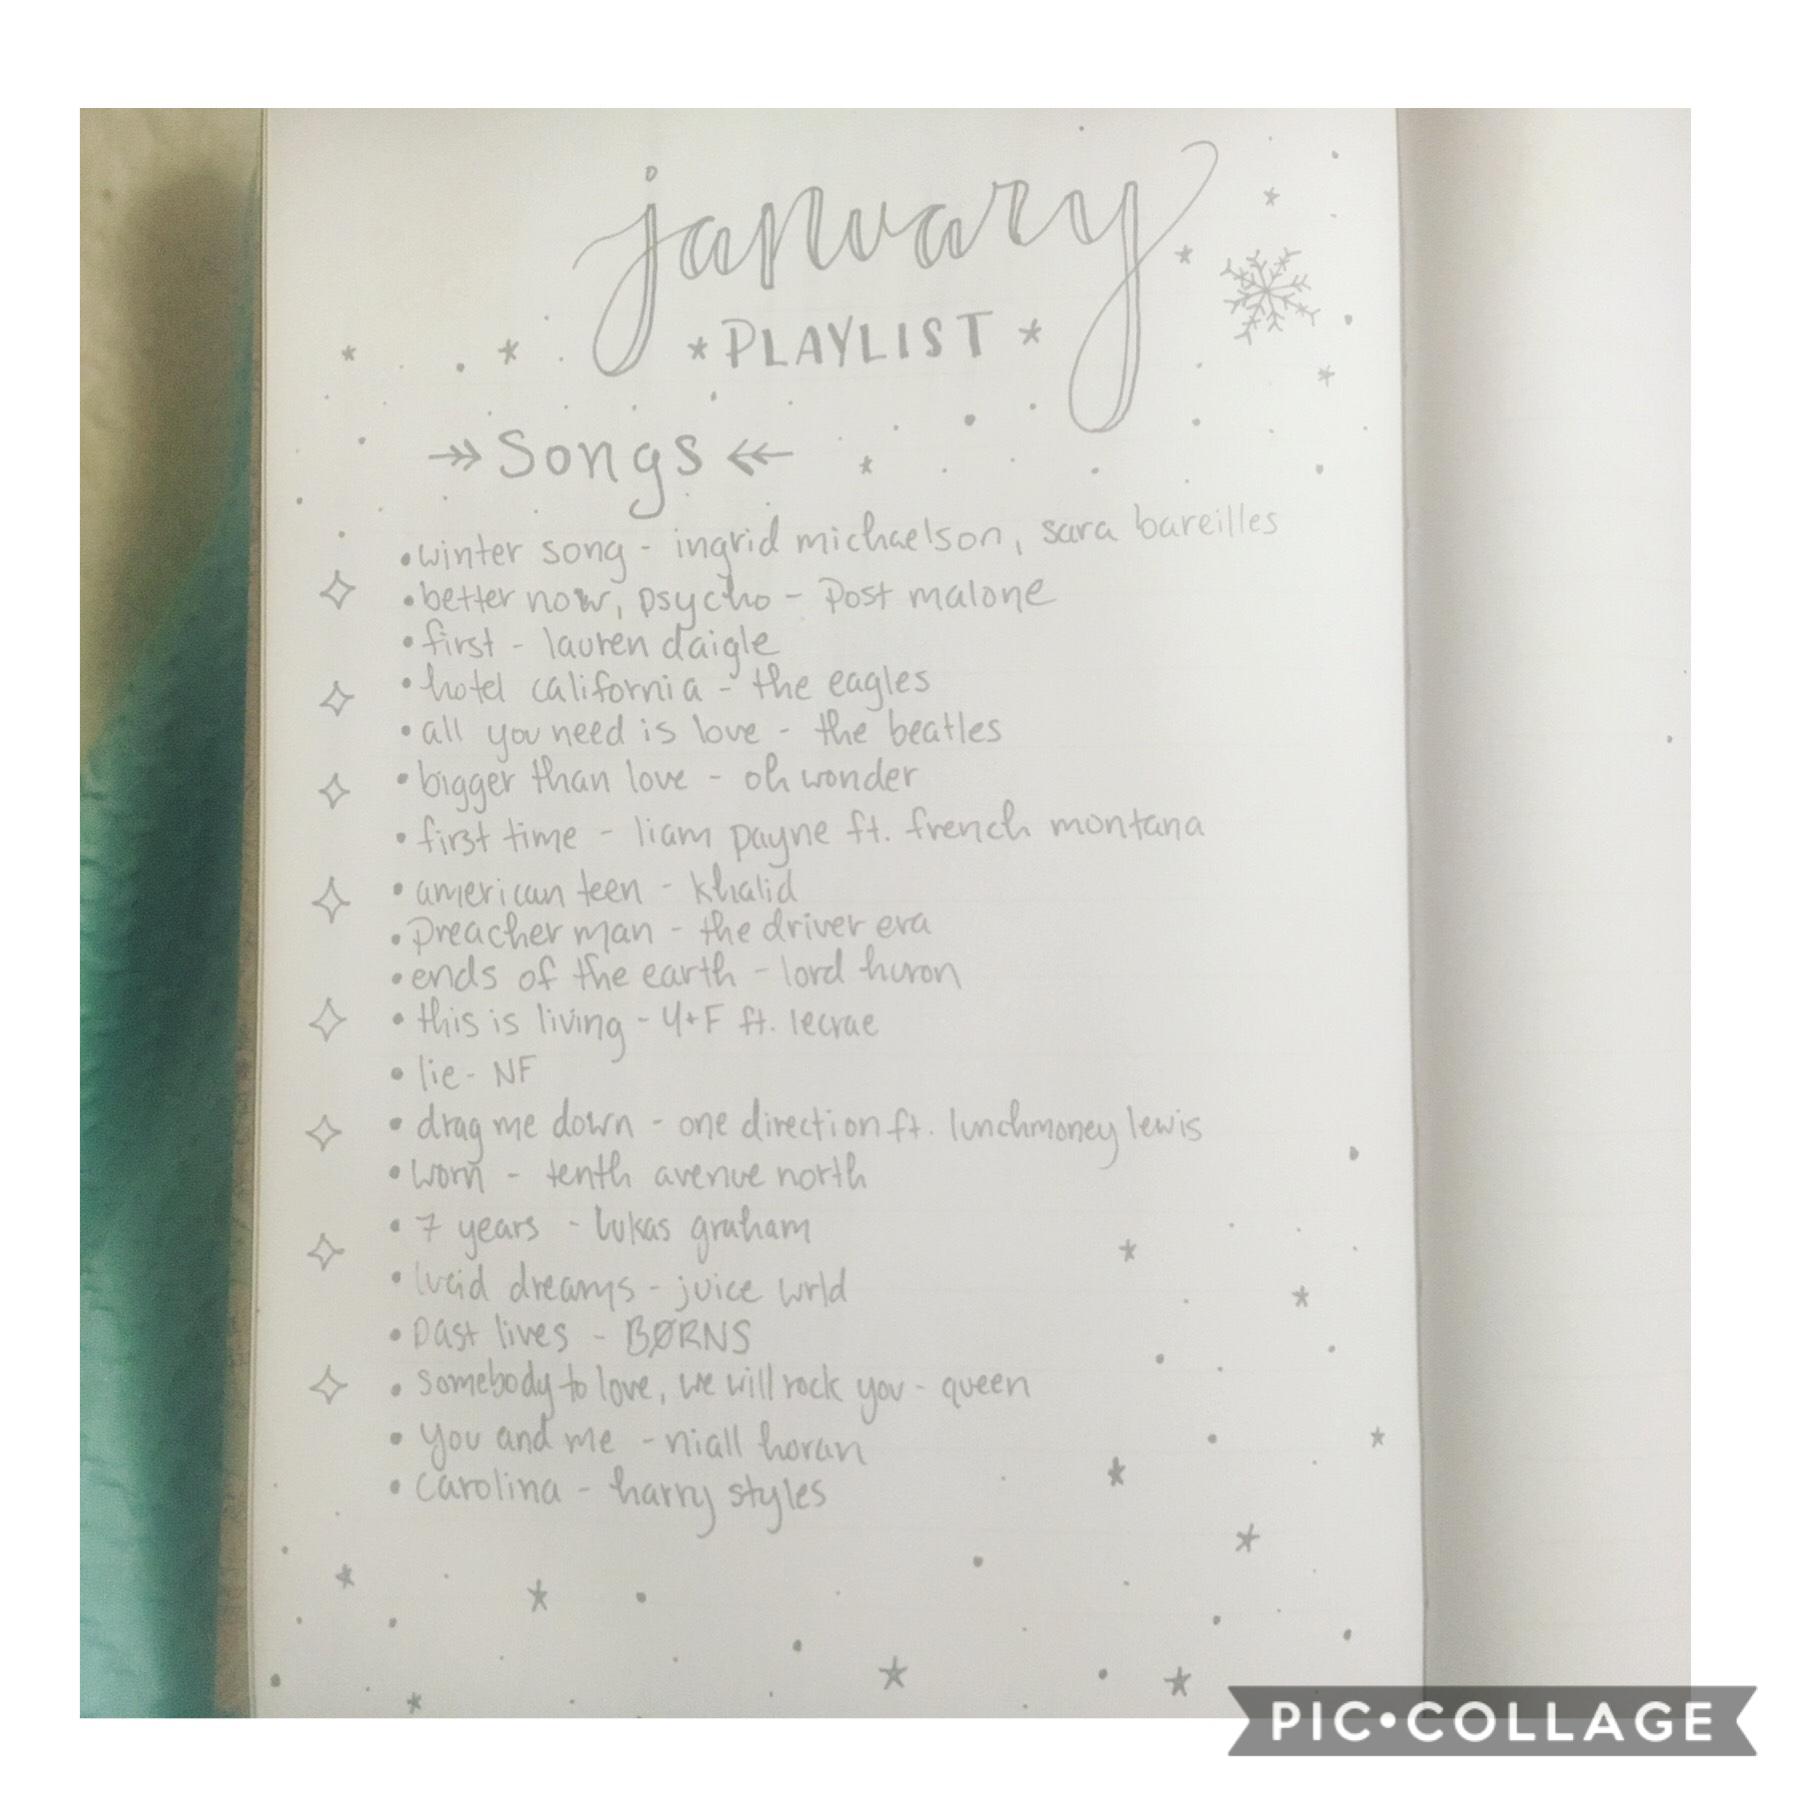 hopefully y’all can actually read this ....? ik its super small n blurry lol but this is kinda what i’ve been listening to this month :)